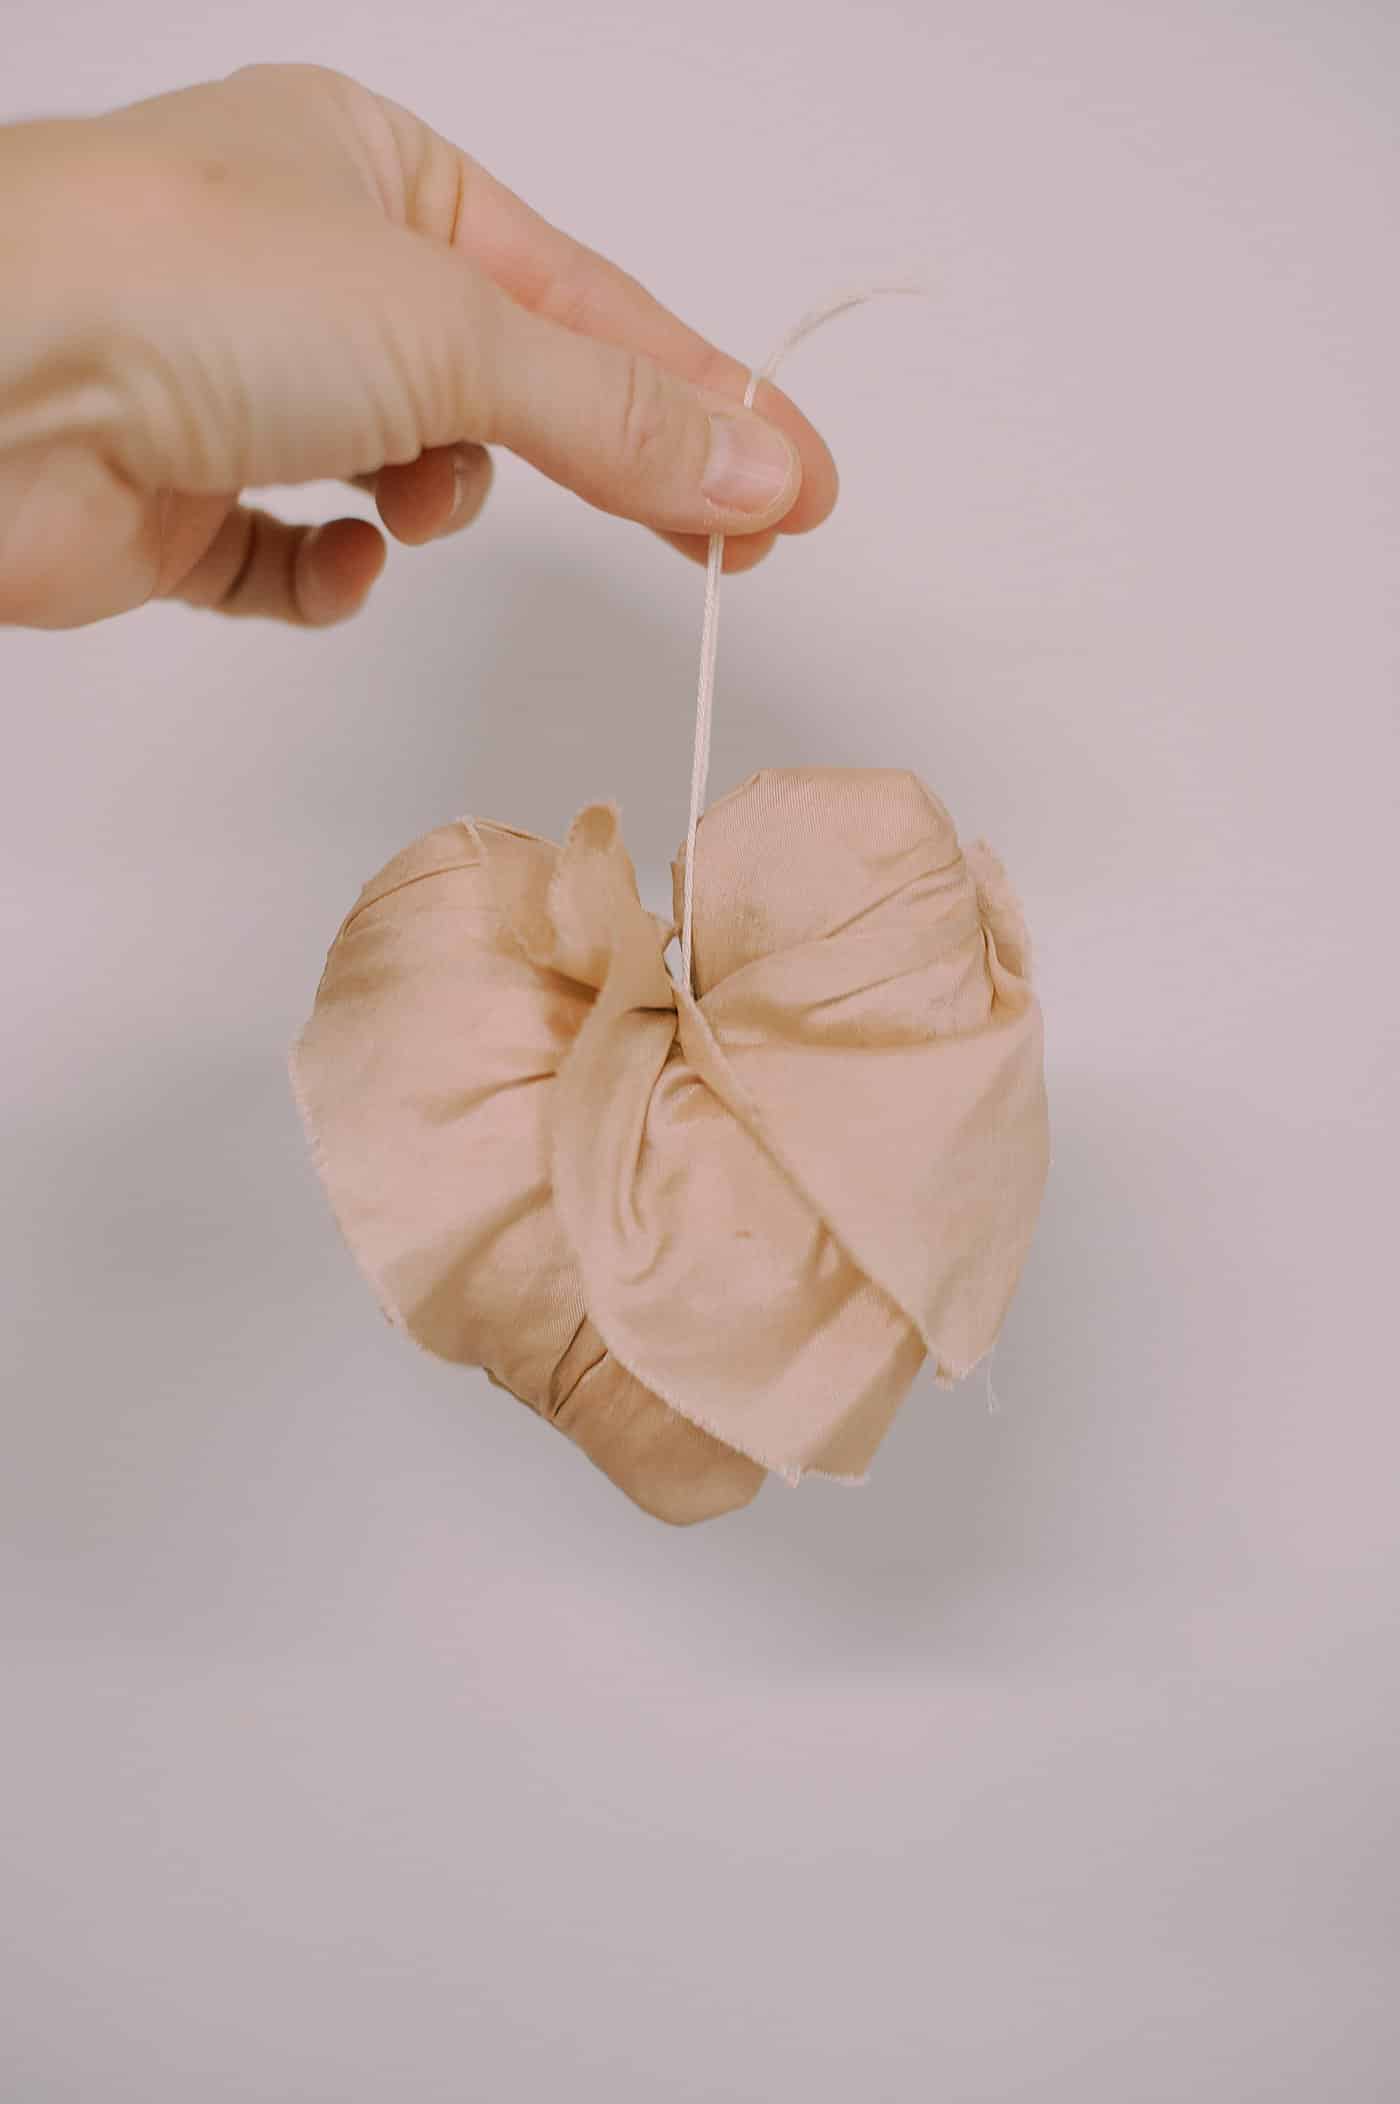 How to Make a Heart Memory Ornament.